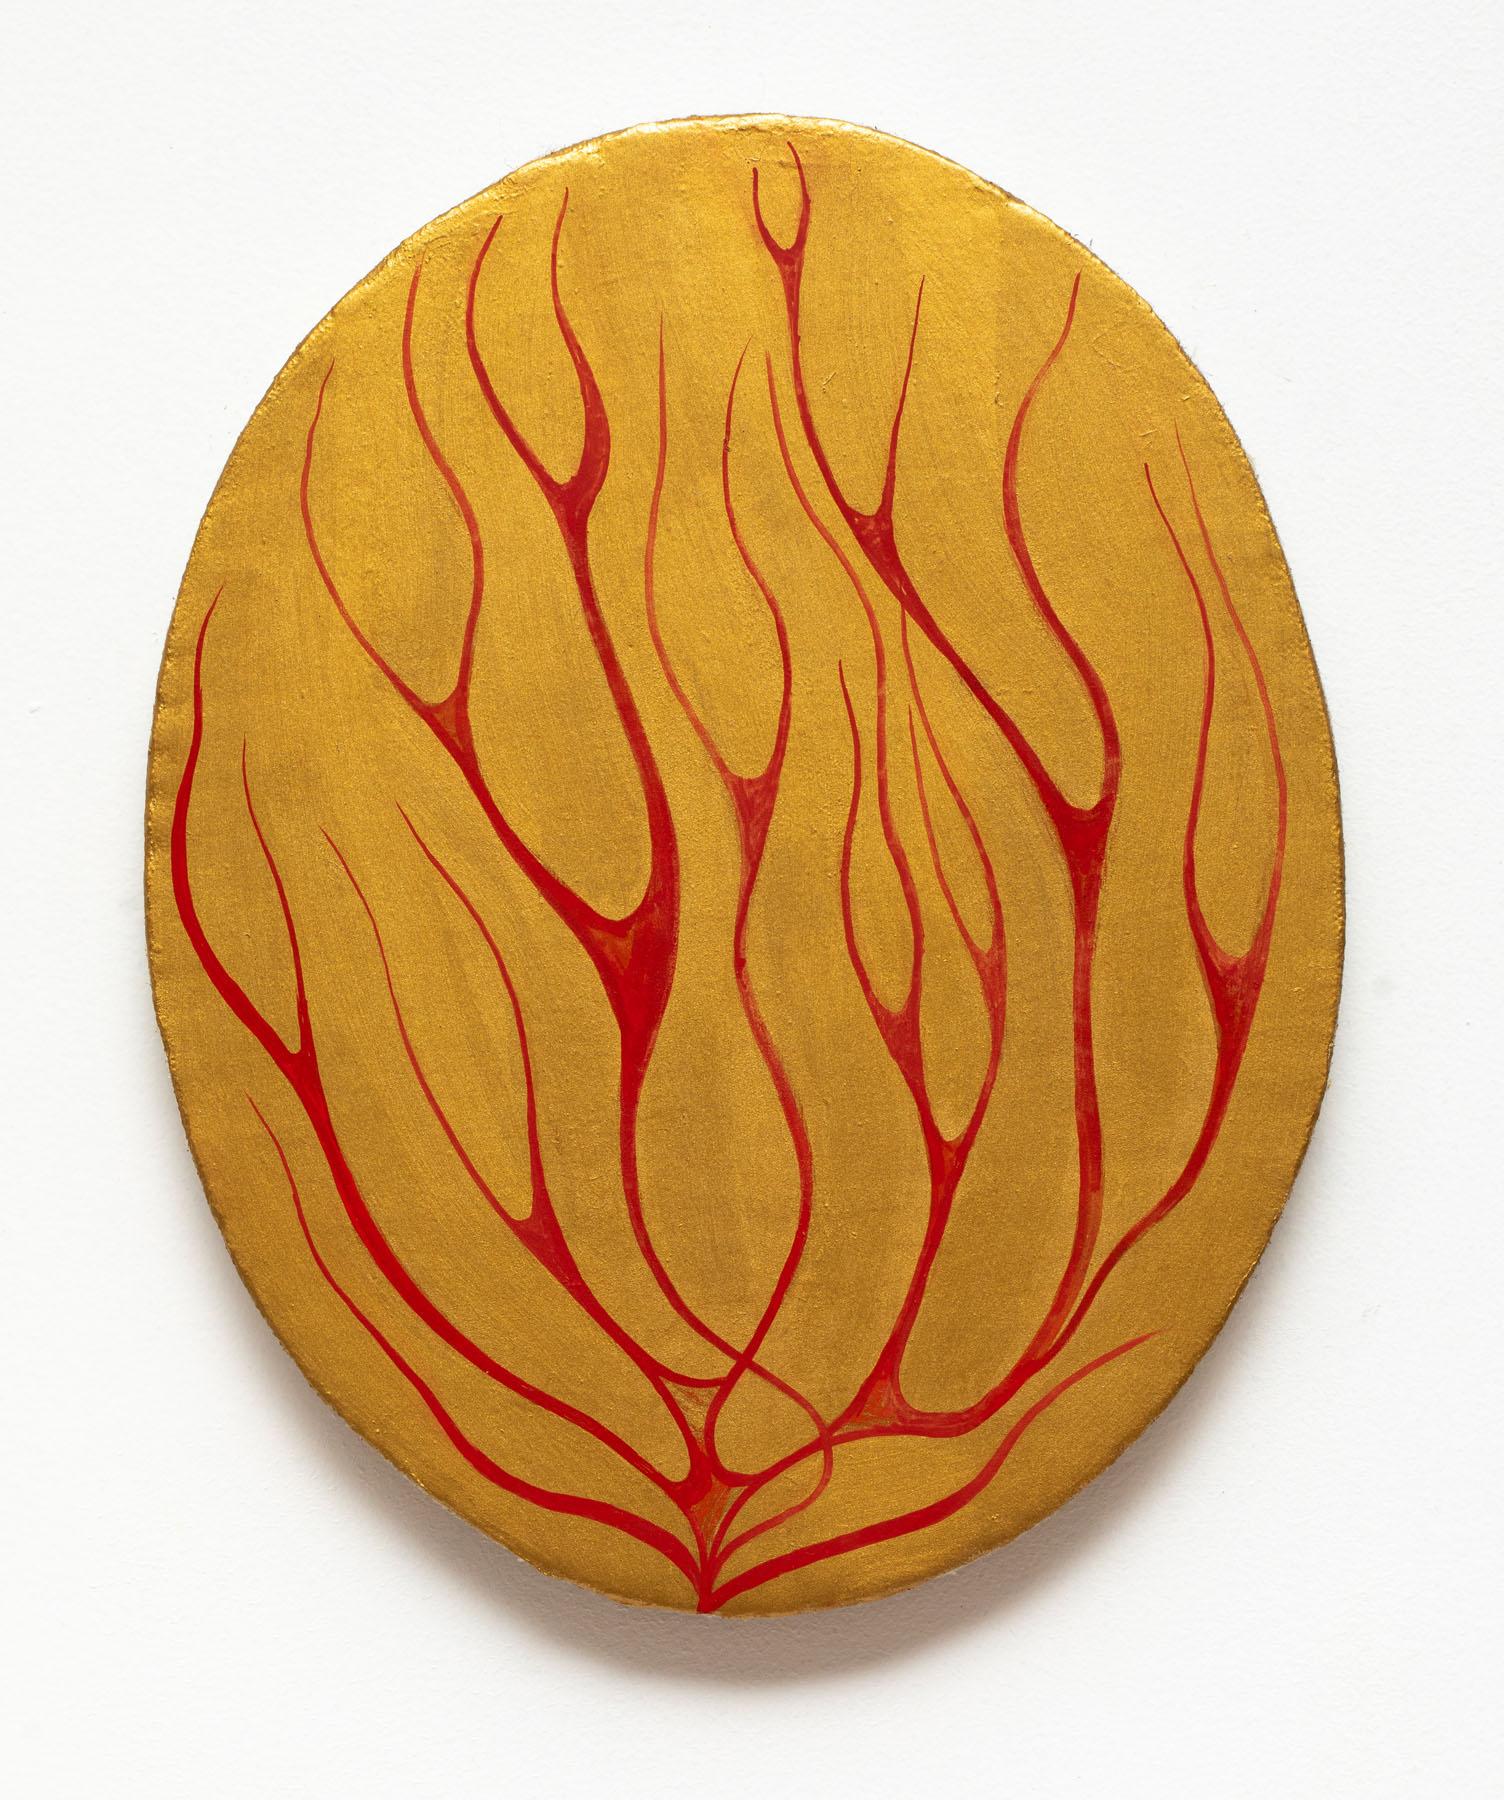 Jim Denney Abstract Painting - Flame 3, red fire on gold background, oil painting on oval panel